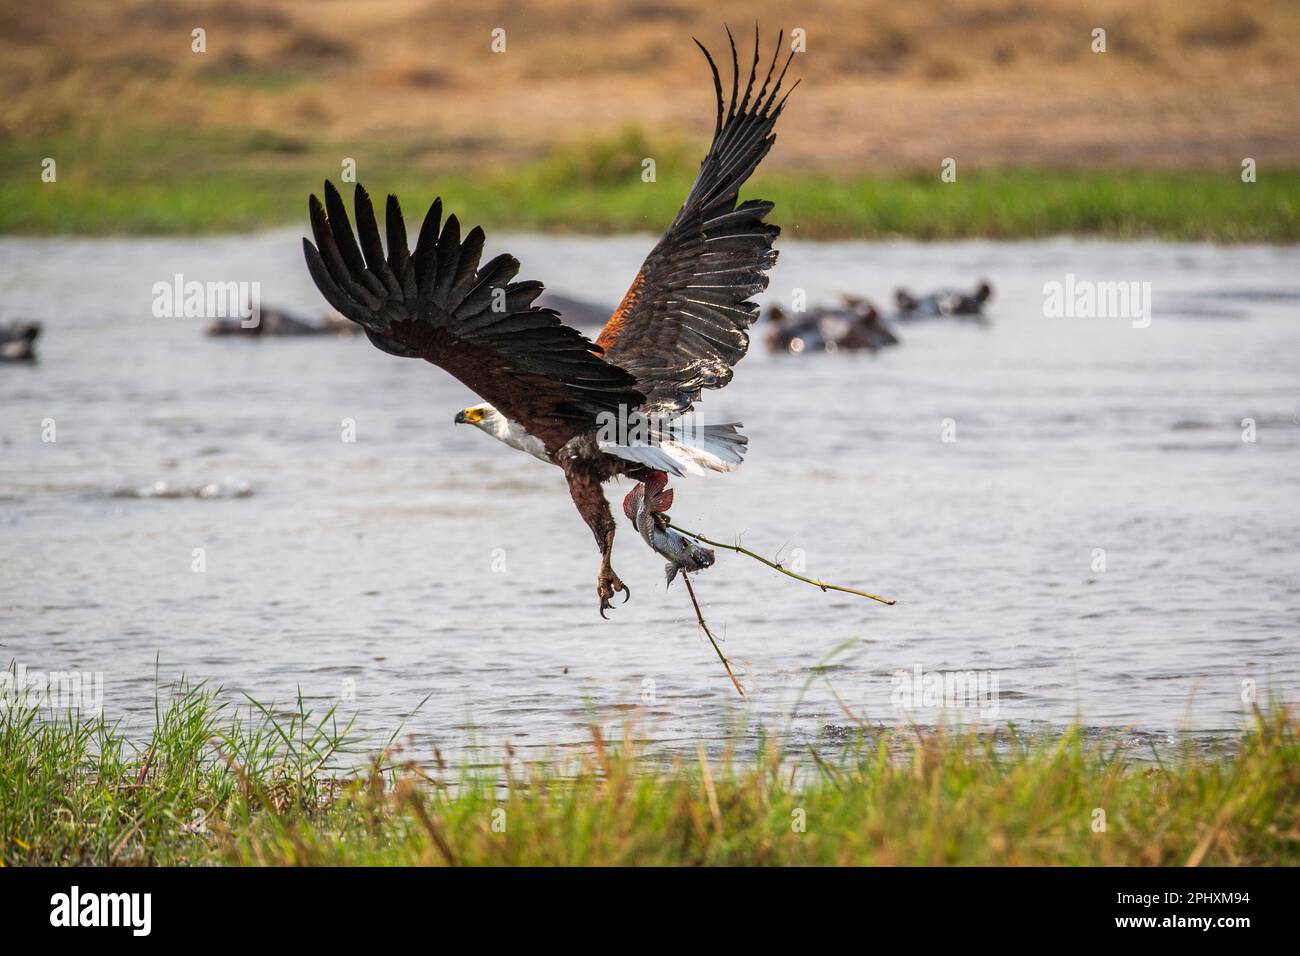 African Sea-Eagle (Haliaeetus vocifer) caught a fish with its large talons in flight. Wings spread, fish in talons. Okavango Delta, Botswana, Africa Stock Photo